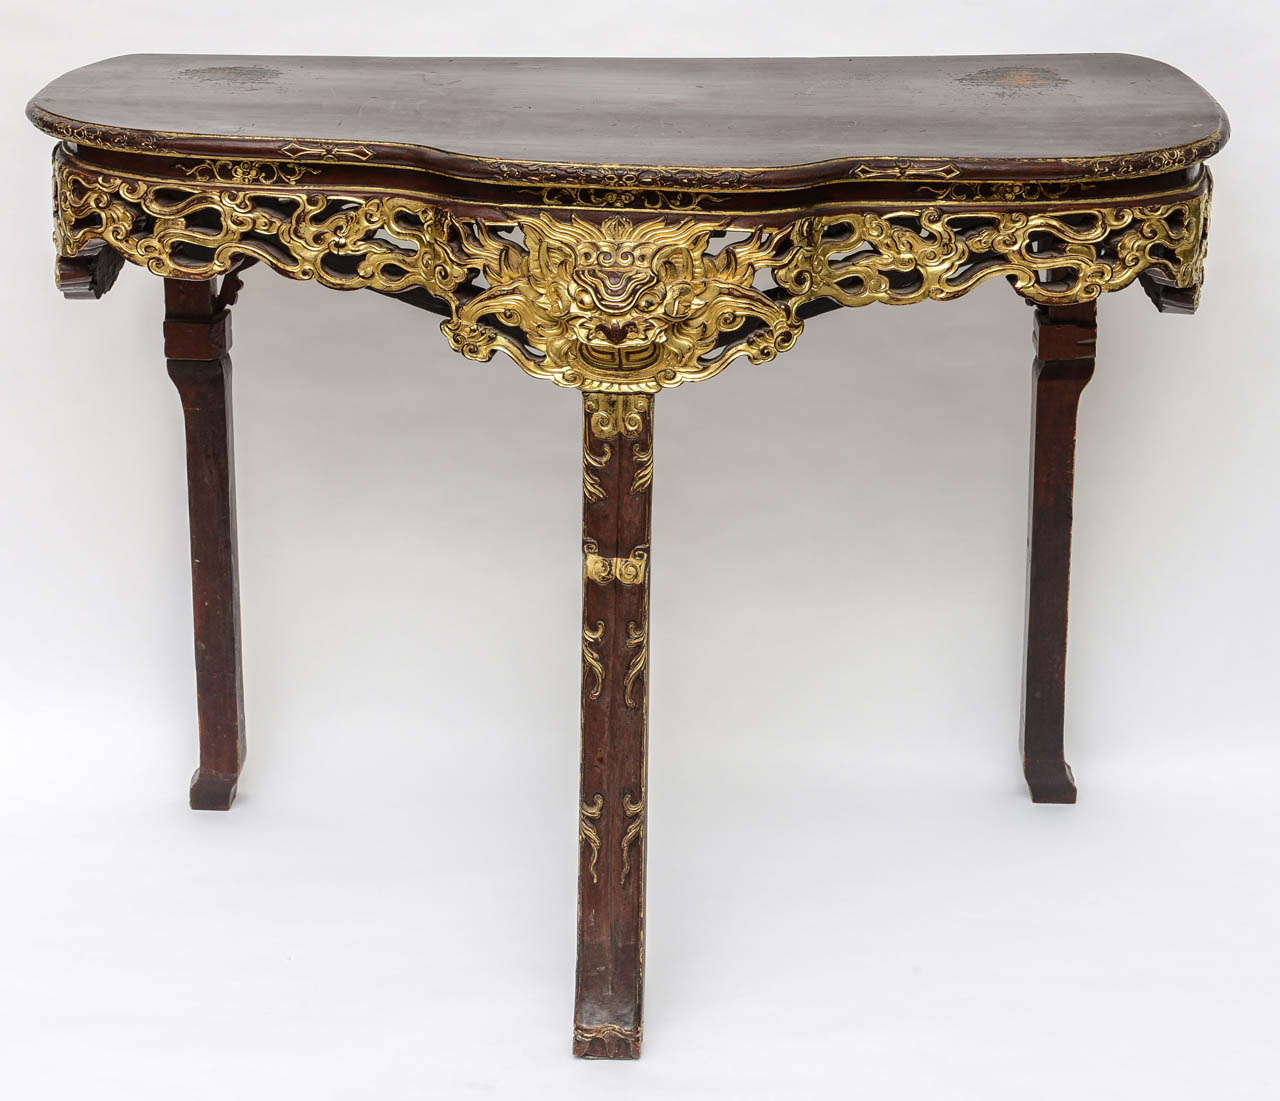 Chinoiserie Hand-Carved Console Table with three legs from the 19th century. 
Handmade carved Wood with Gold Leaf Finish.
In good vintage condition with some normal scuffs and marks.